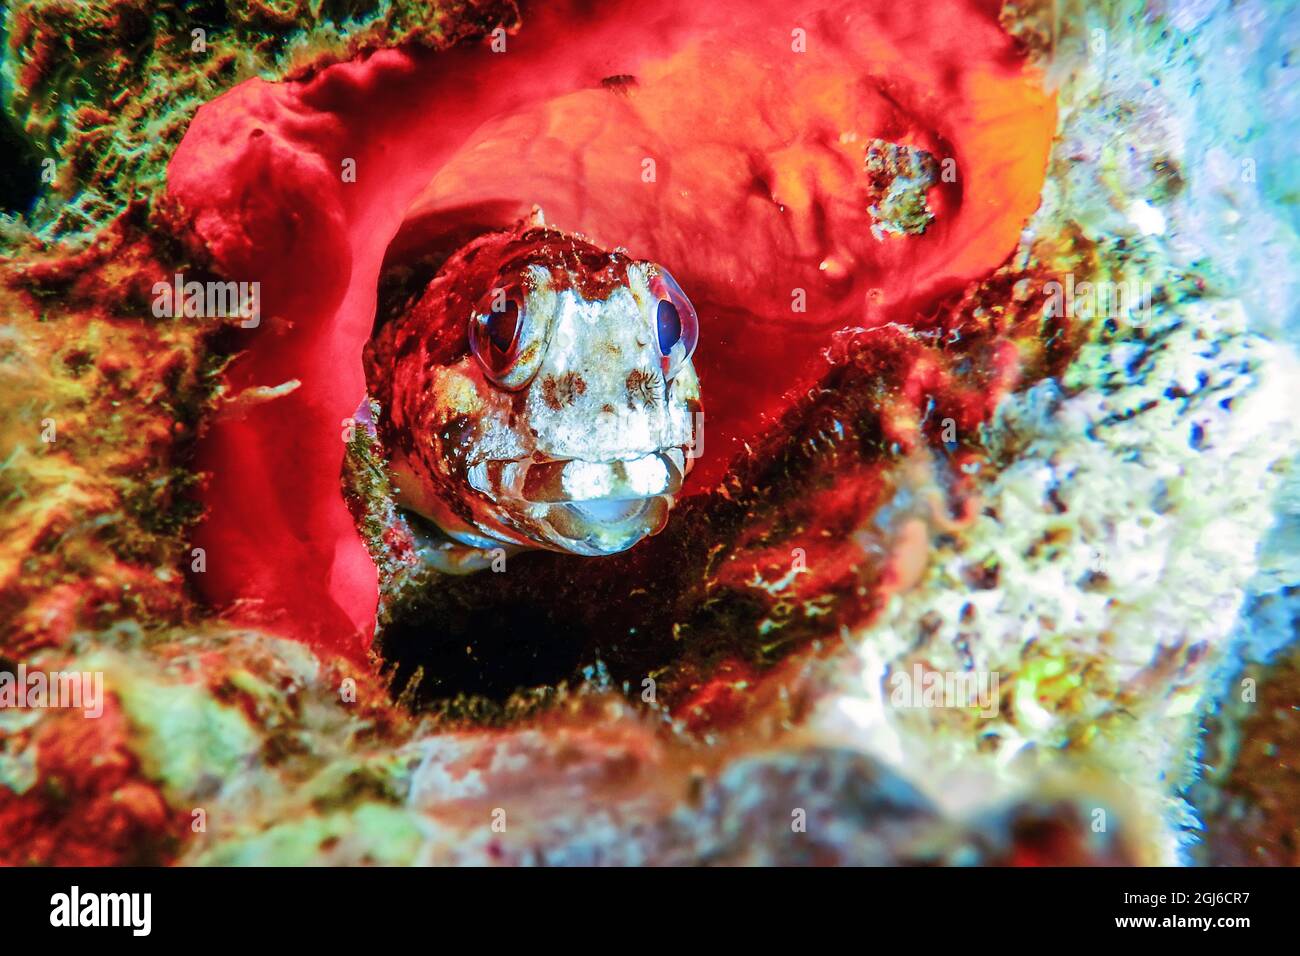 Portrait Of Cute Blenny fish, Close up Stock Photo